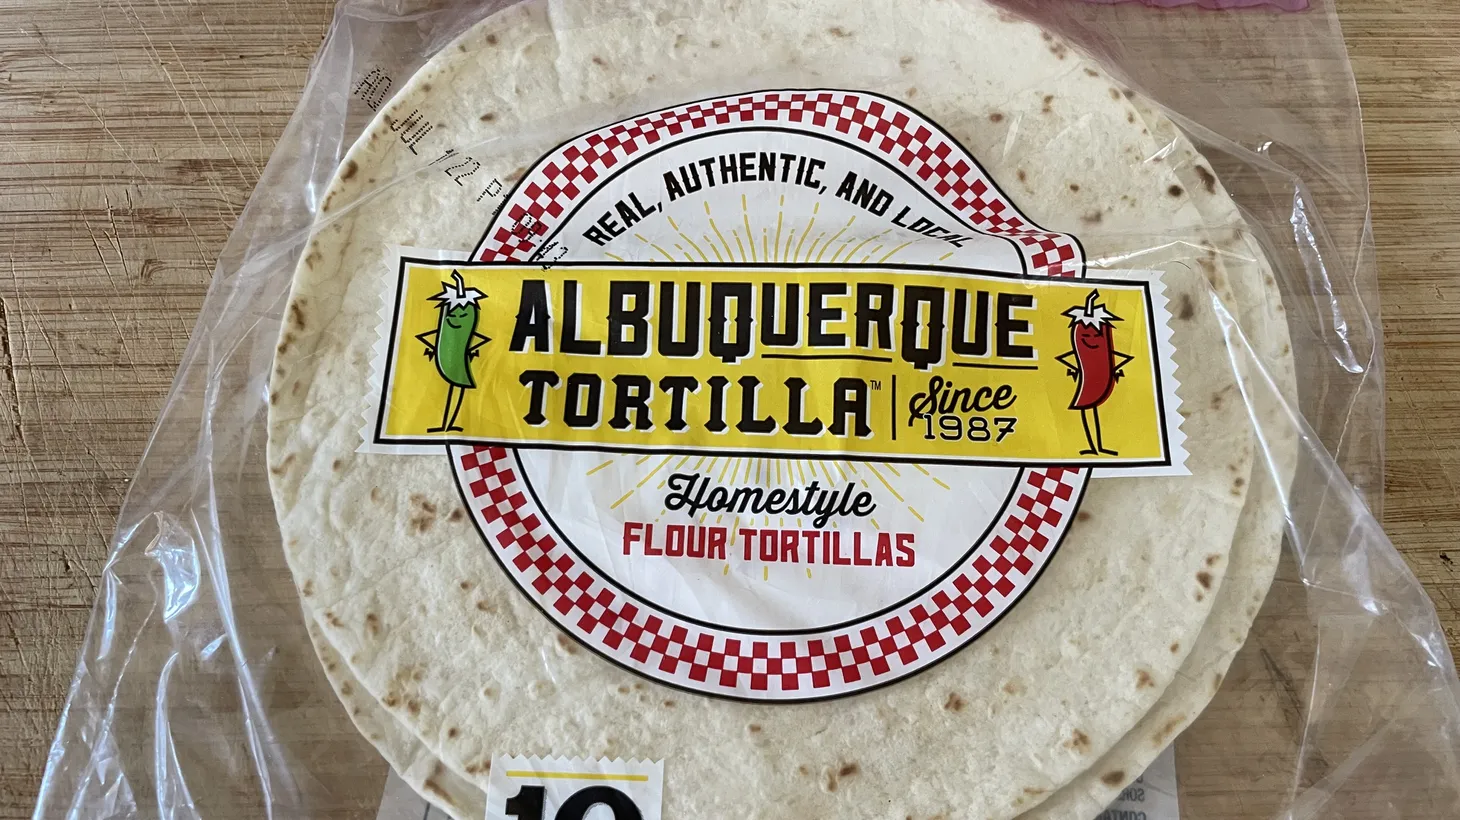 “Albuquerque Tortilla nailed the requisite thickness of a traditional New Mexico flour tortilla,” says Gustavo Arellano.